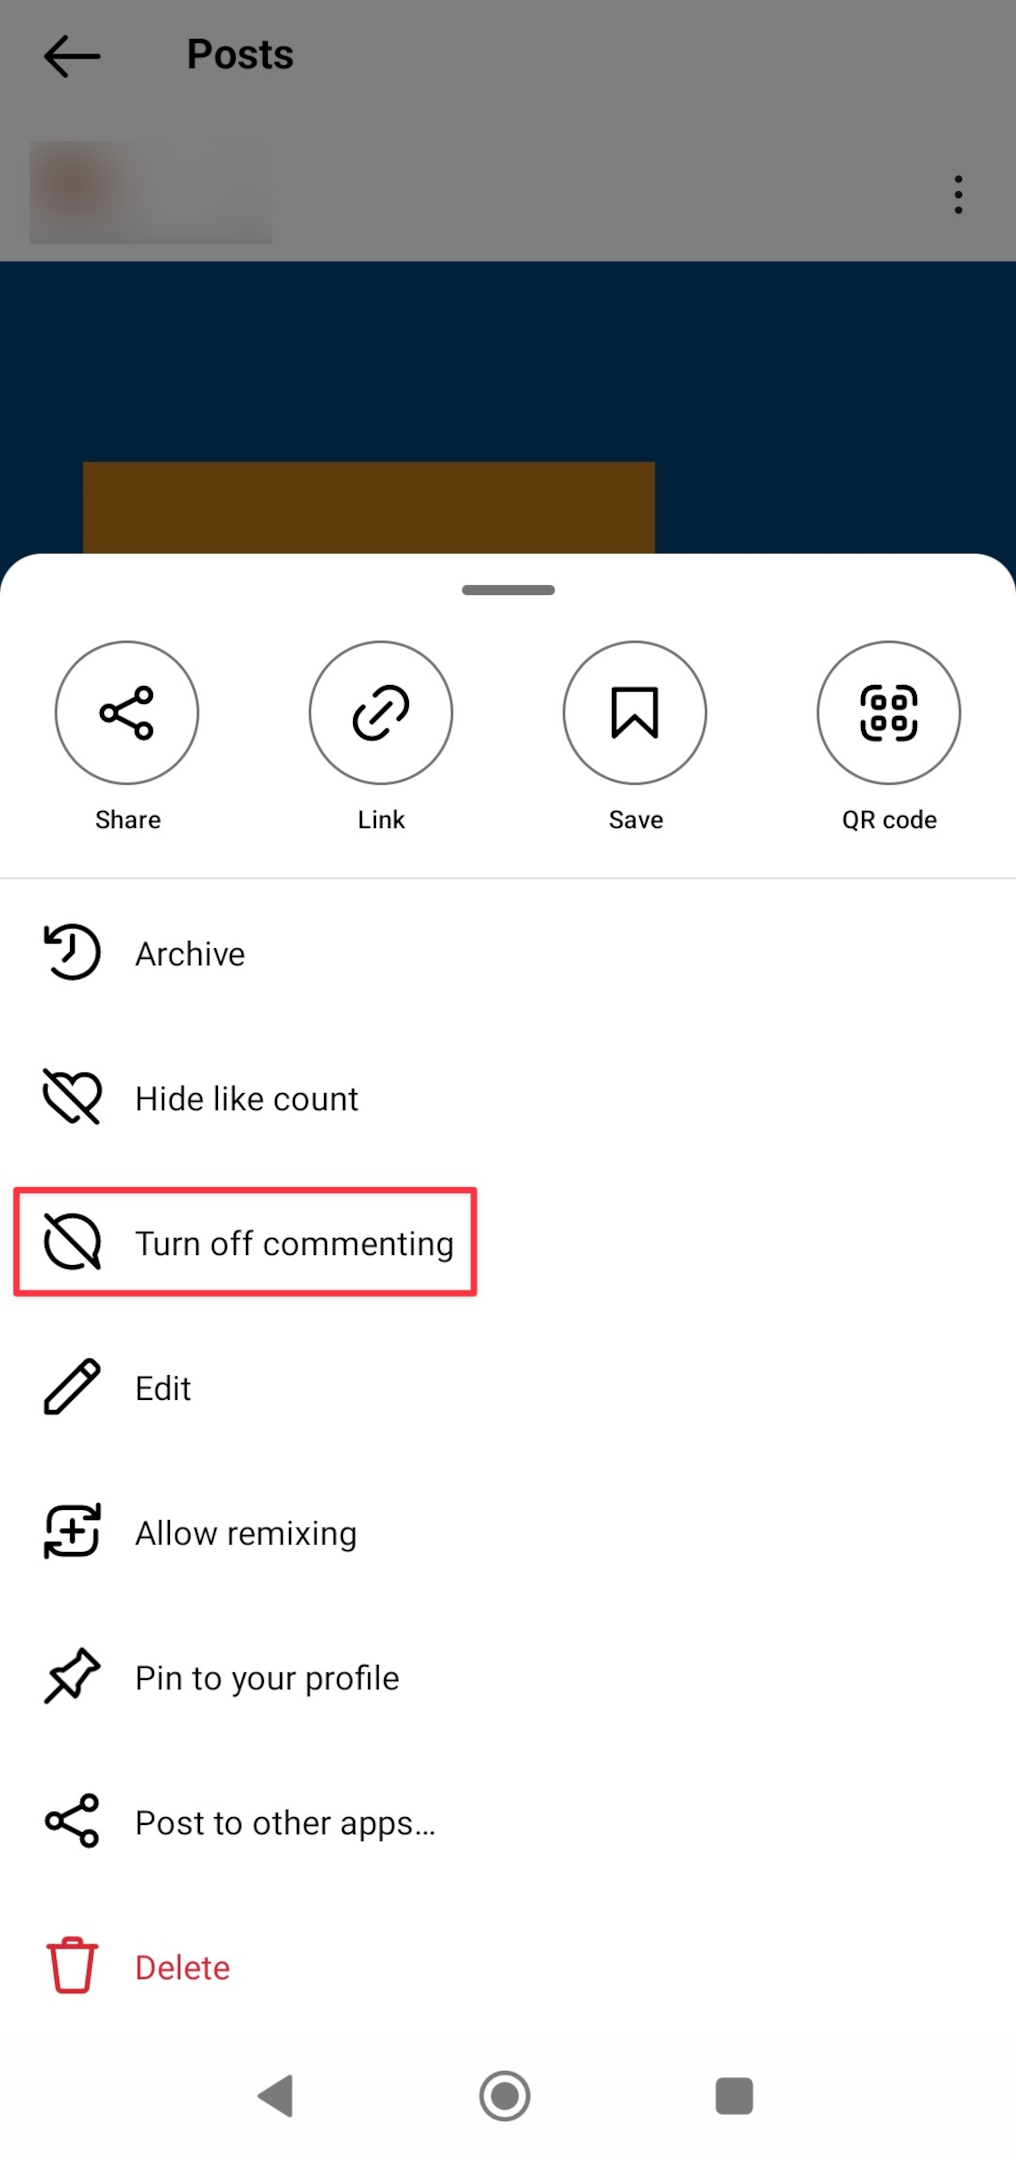 Remote.tools show how to turn off commenting on your particular post on Instagram